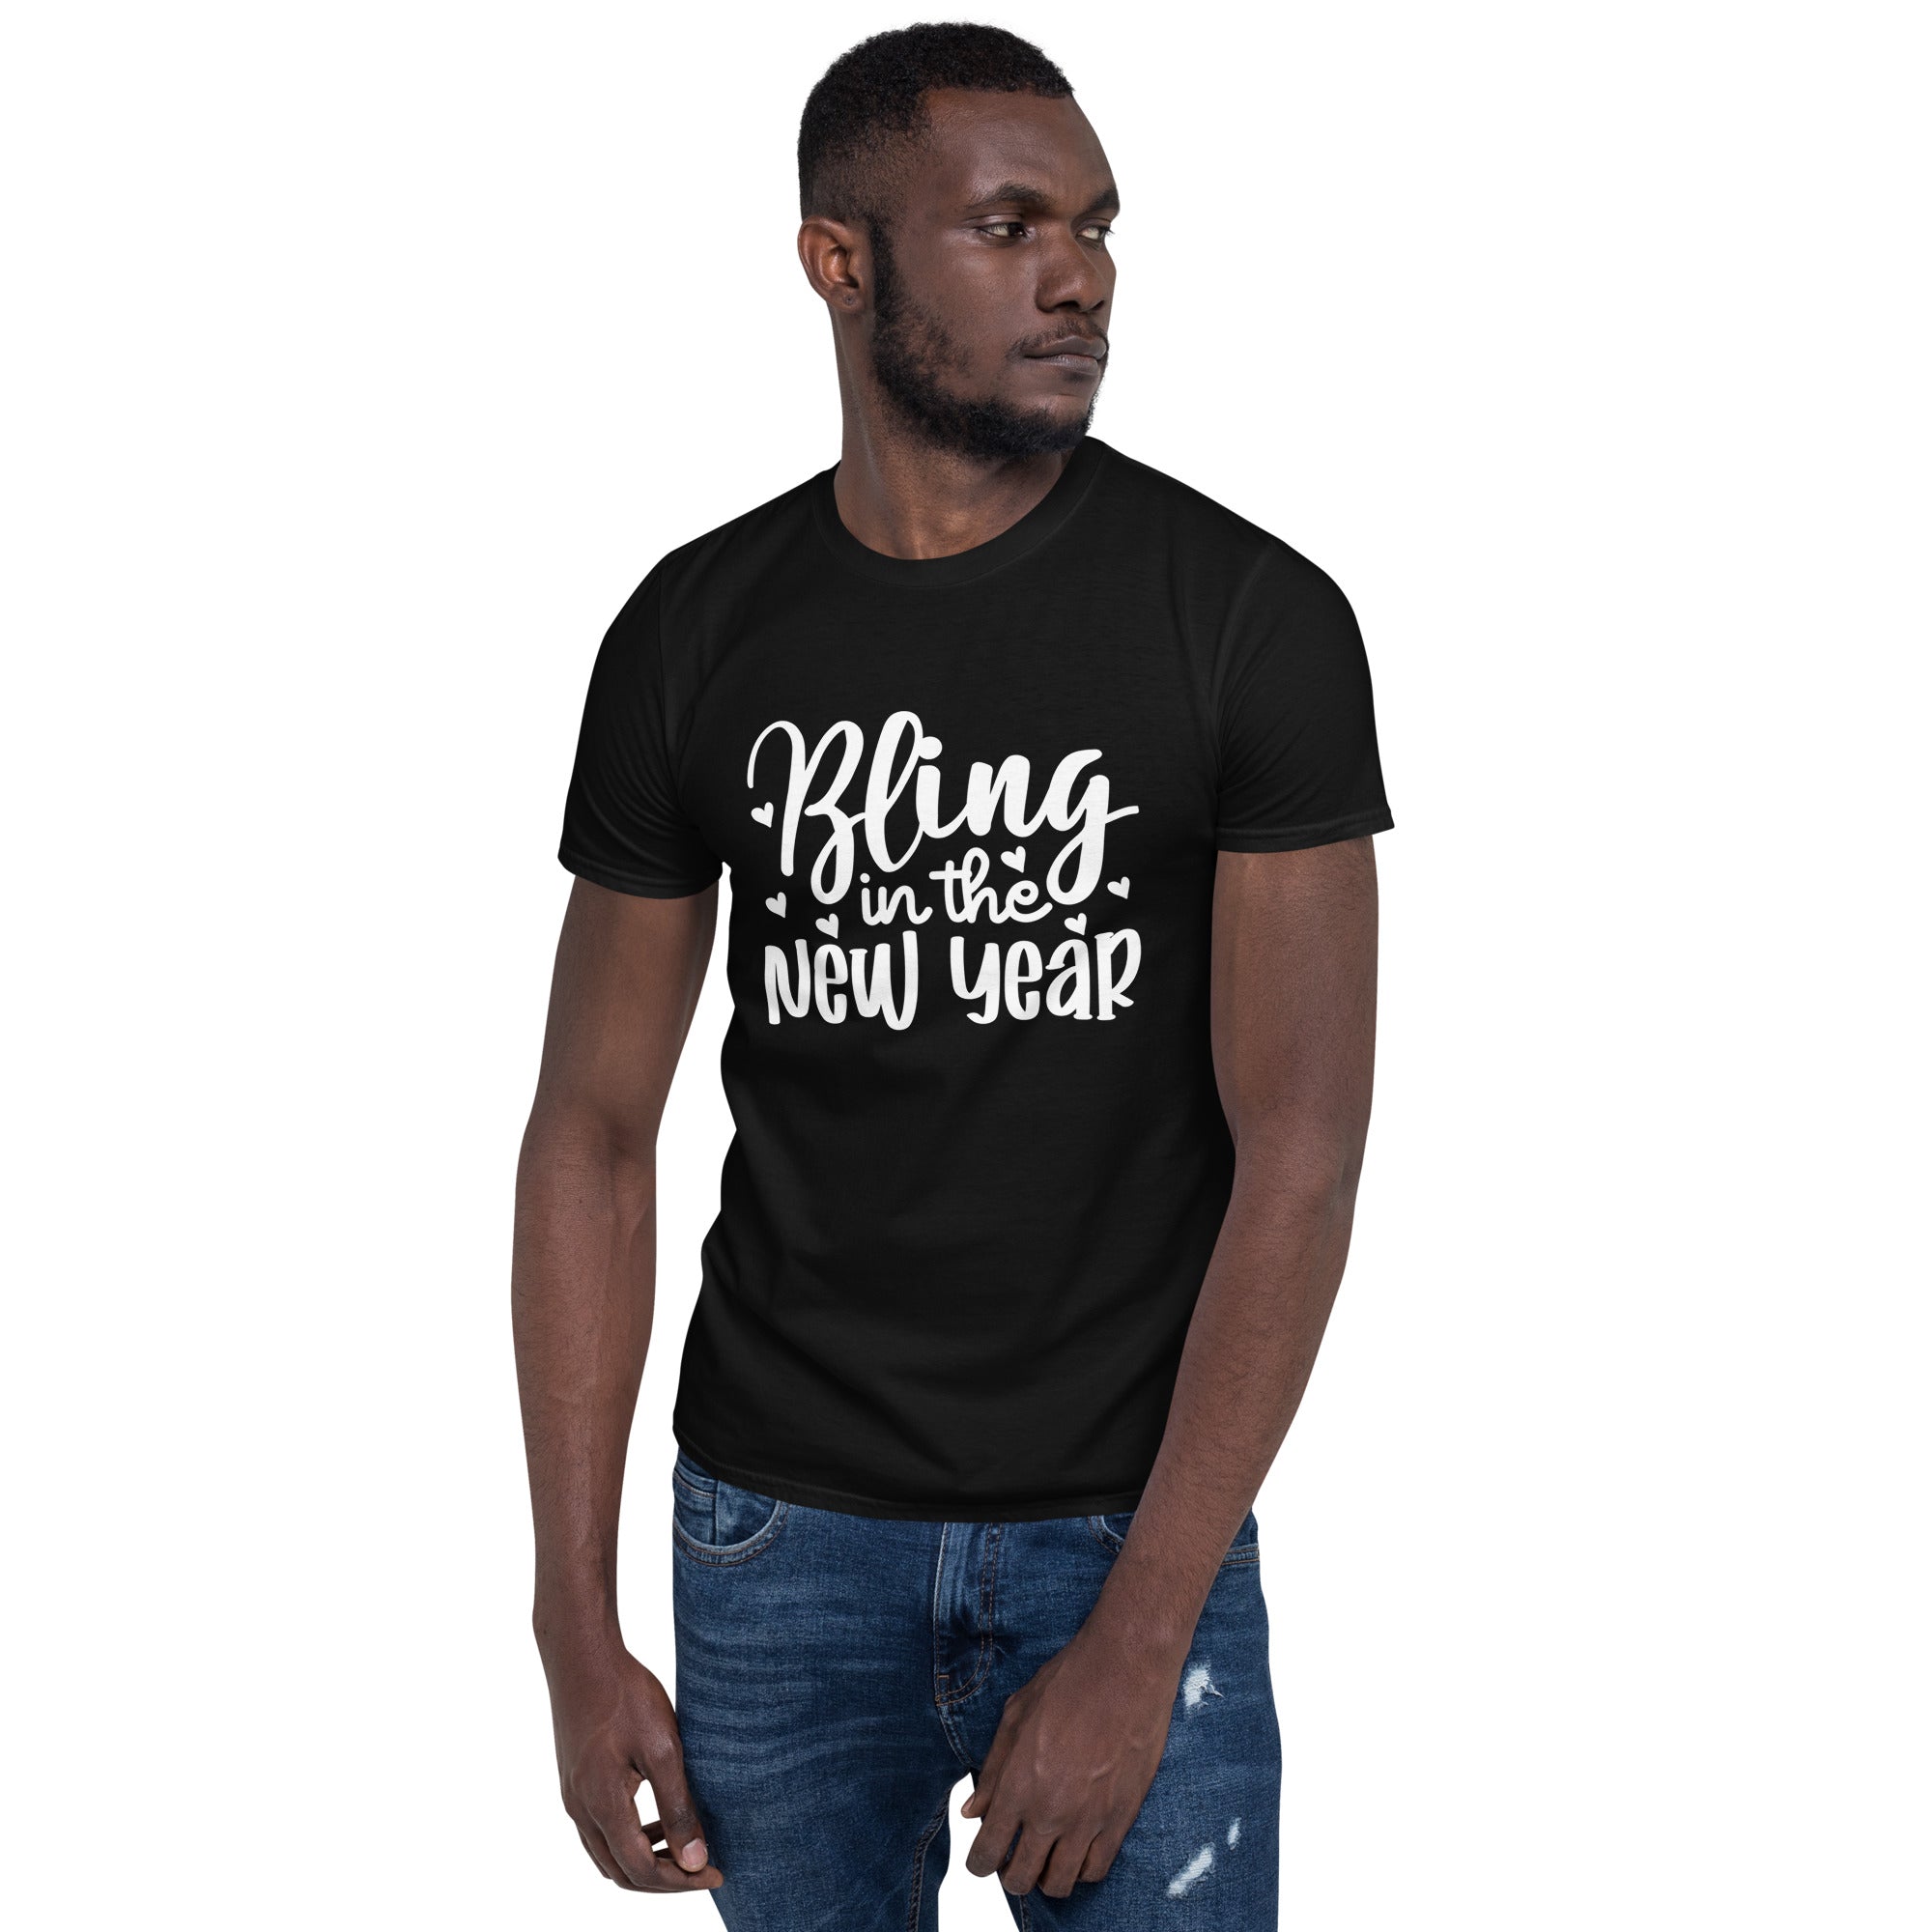 Bling In The New Year - Short-Sleeve Unisex T-Shirt